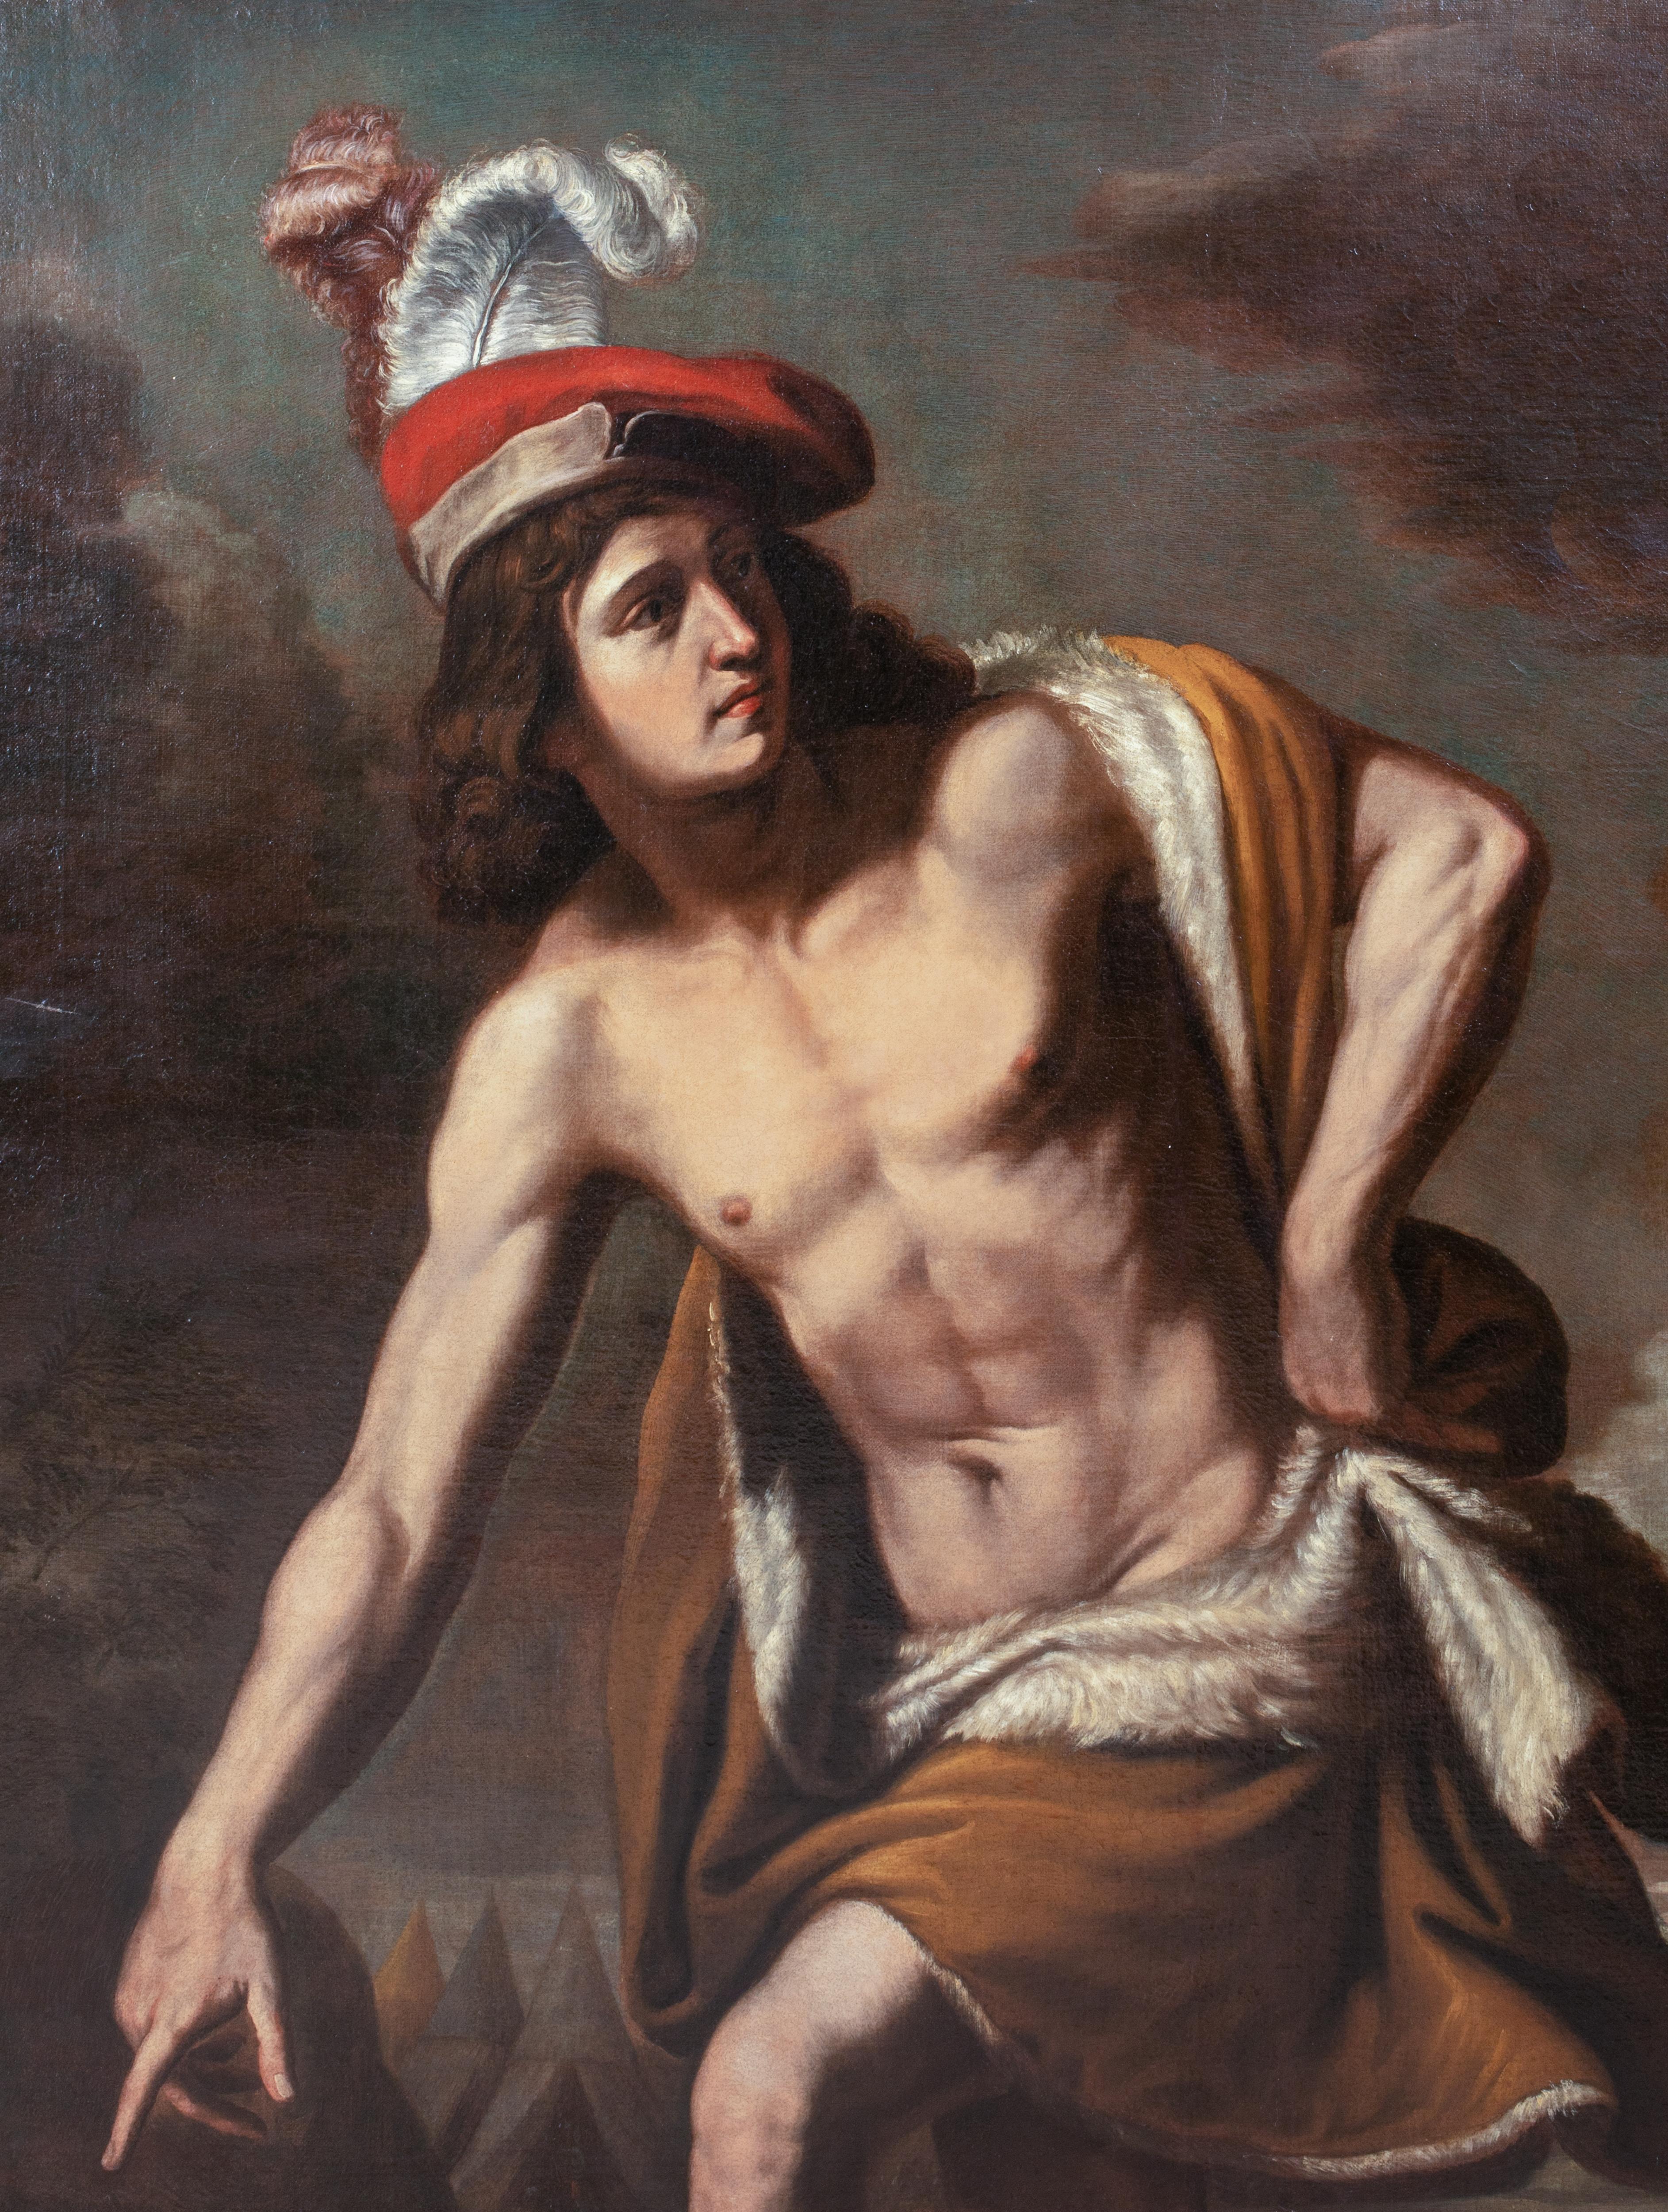 David & the Head Of Goliath, 17th Century 

after GUERCINO (1591-1666)

Huge 17th Century Italian Old Master of David after defeating Goliath, oil on canvas. Excellent quality and condition circa 1650 Italian depiction of David with the camp in the